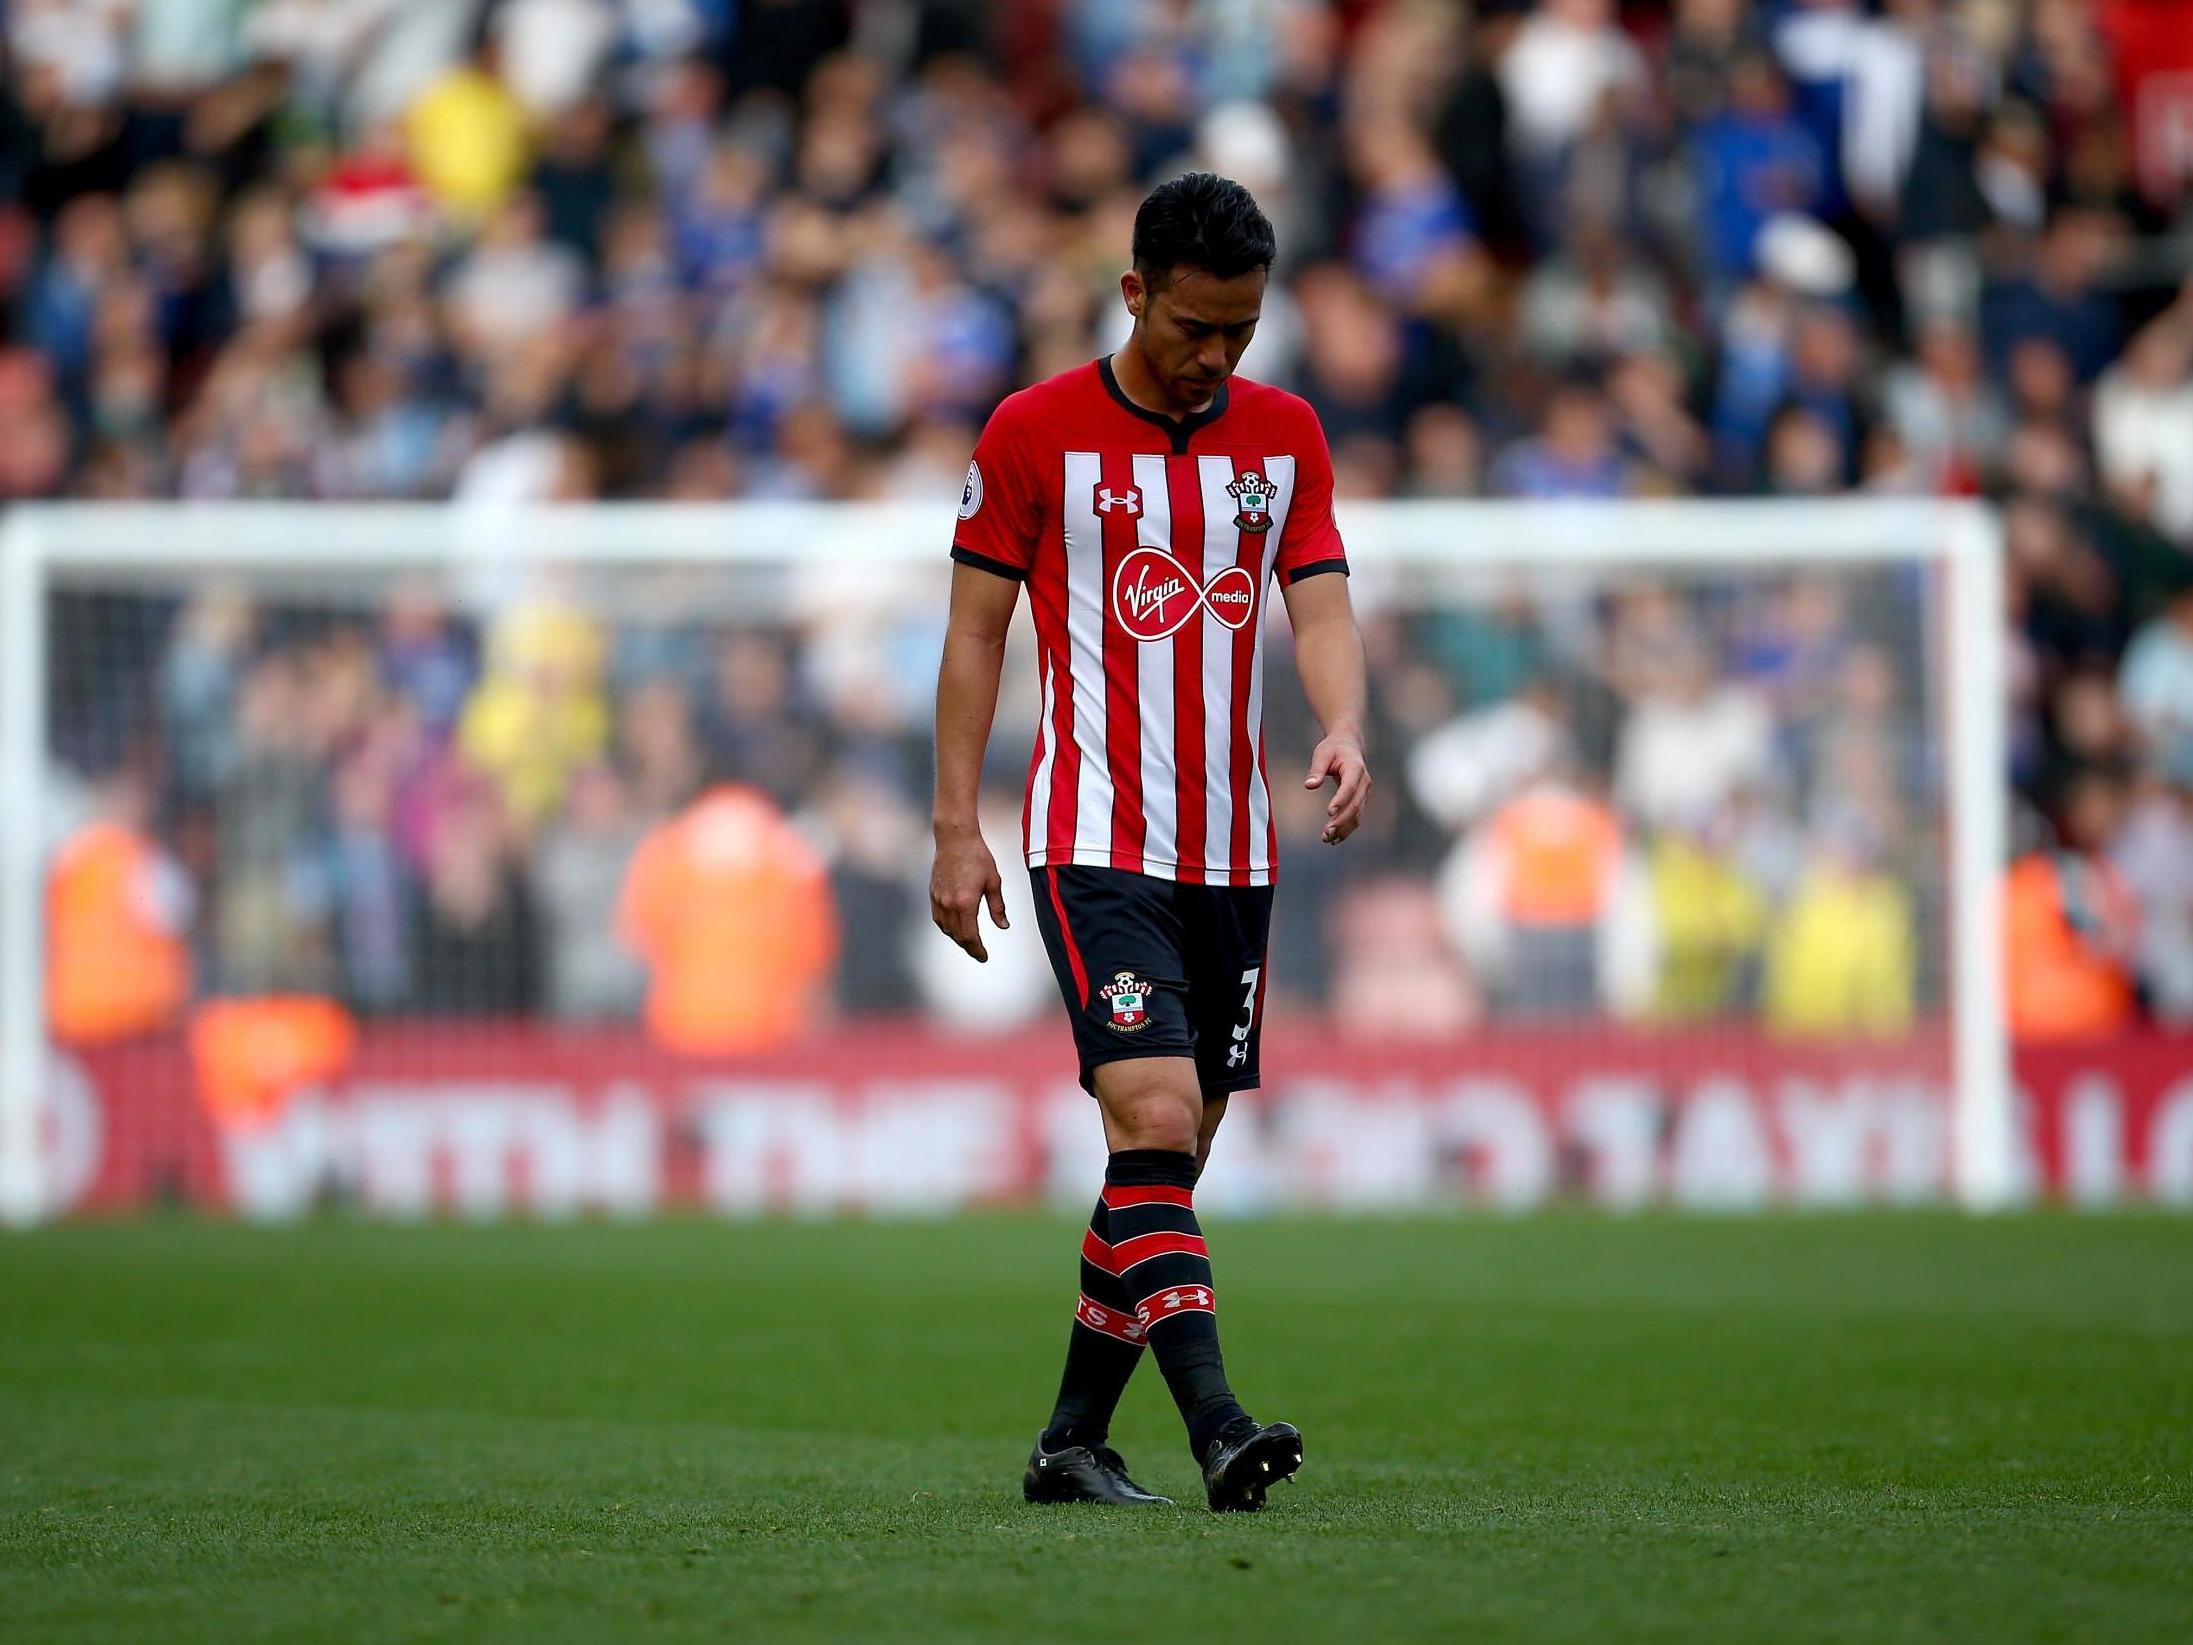 It has been a frustrating start to the season for Southampton